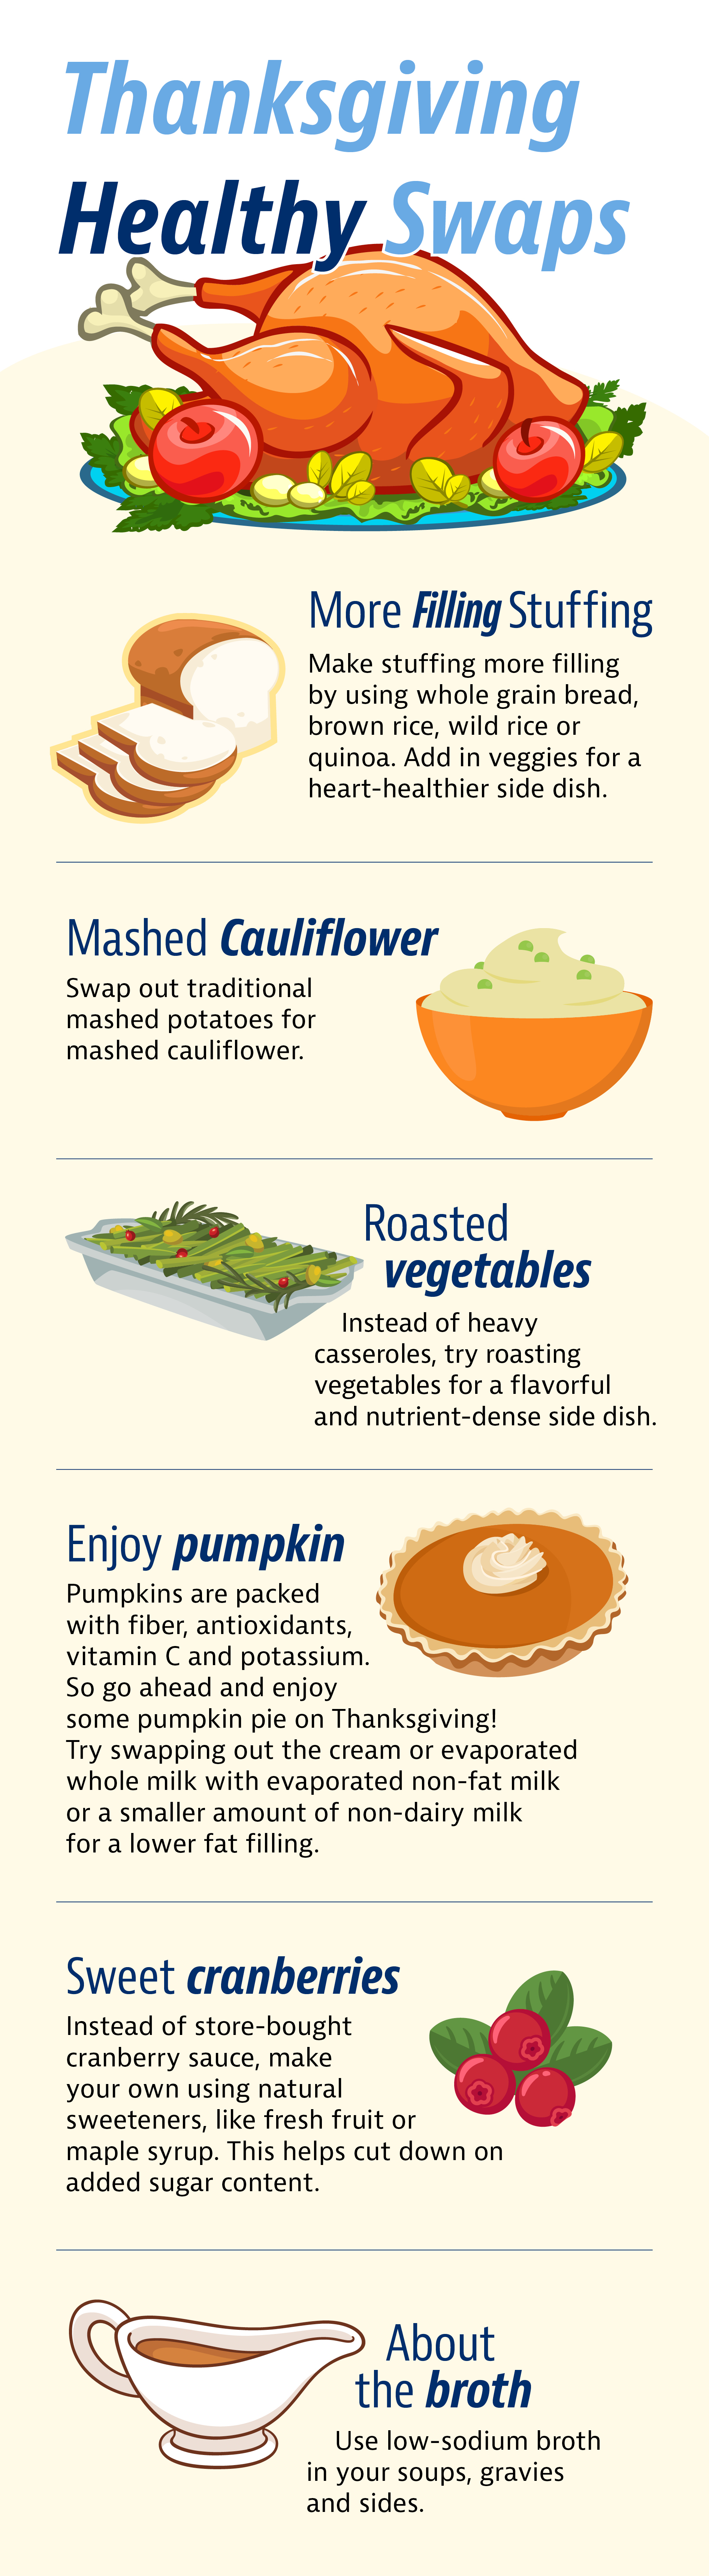 Healthy November Swaps for Thanksgiving Infographic_Blog